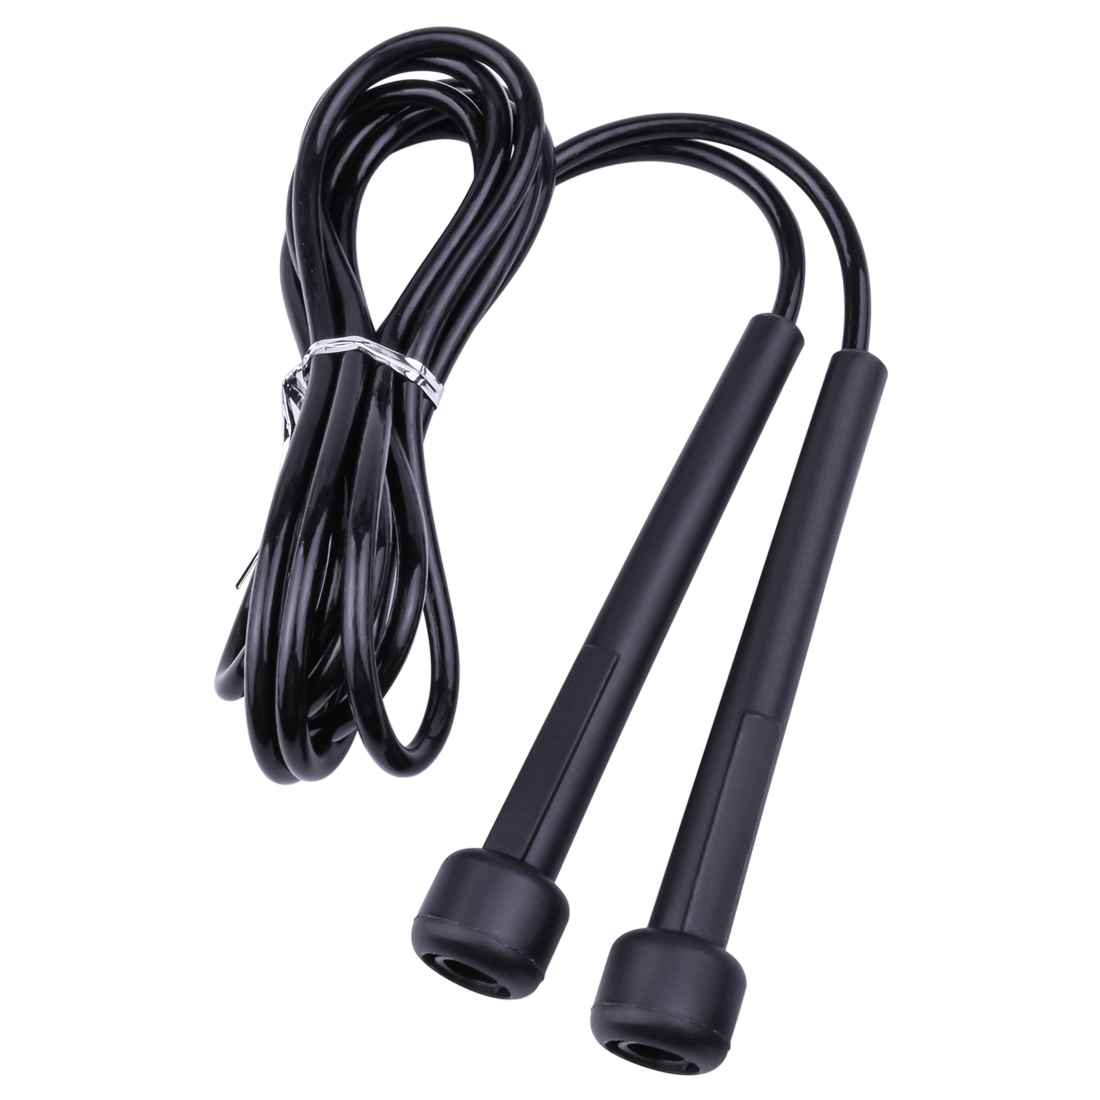 Speed Jump Rope Crossfit Professional Men Women Gym PVC Skipping Rope Adjustable Fitness Equipment Muscle Boxing MMA Training